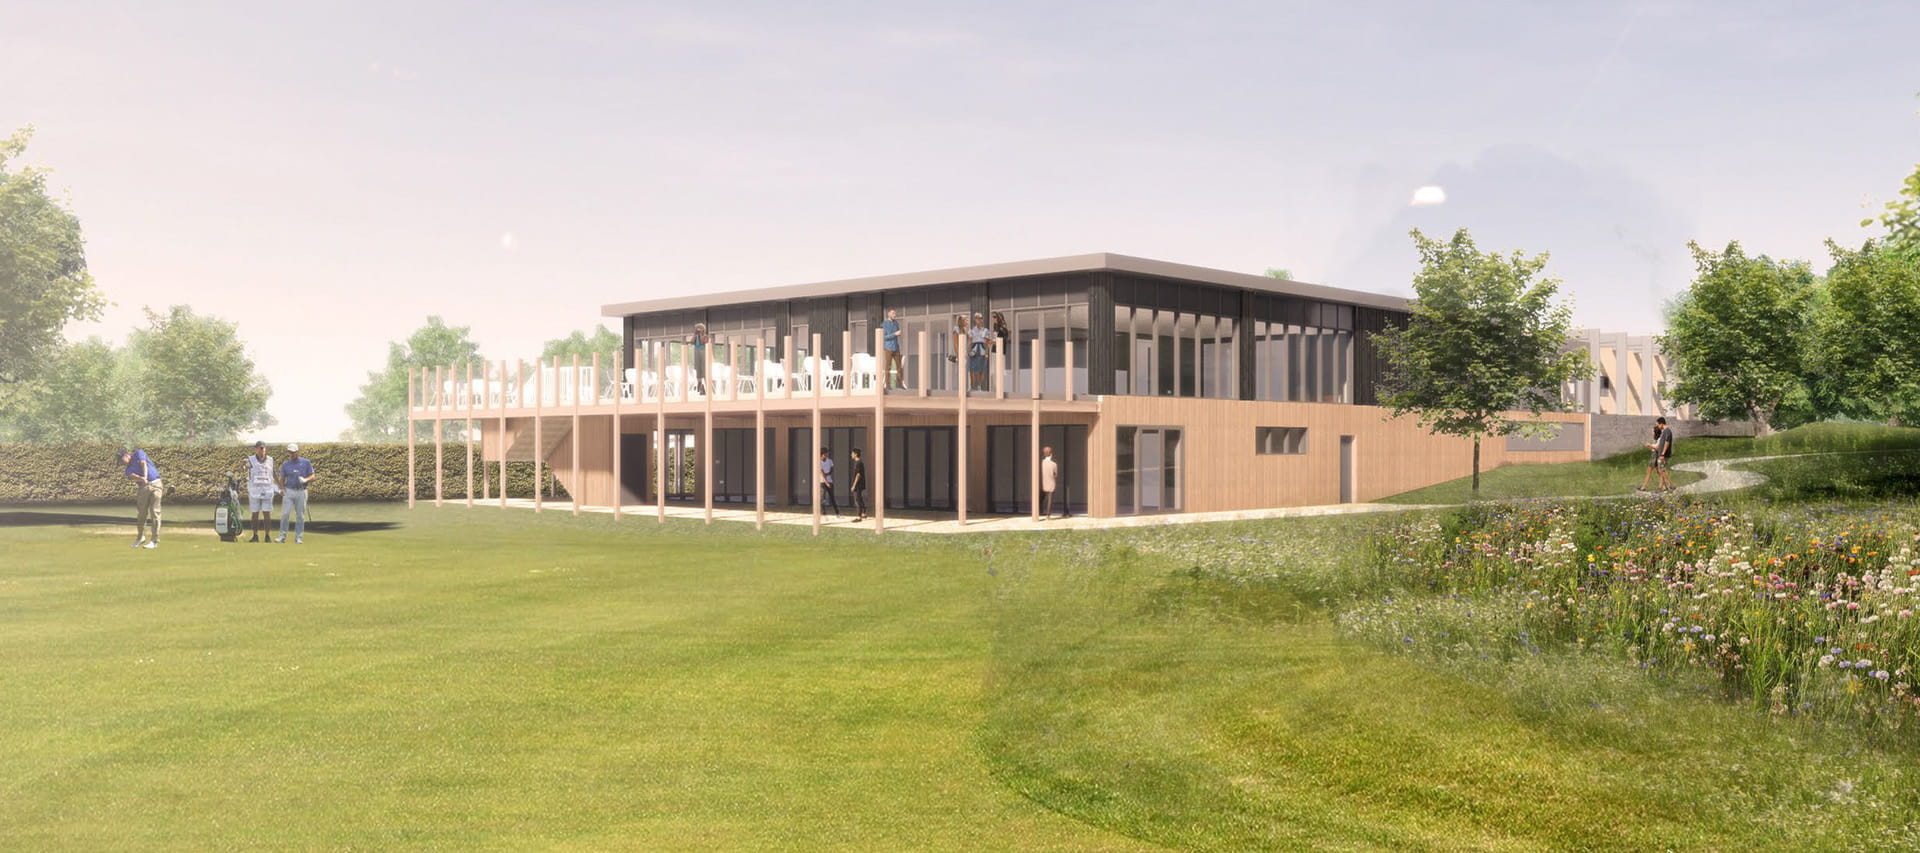 Architect's image of a leisure centre with lawn ISG Ltd